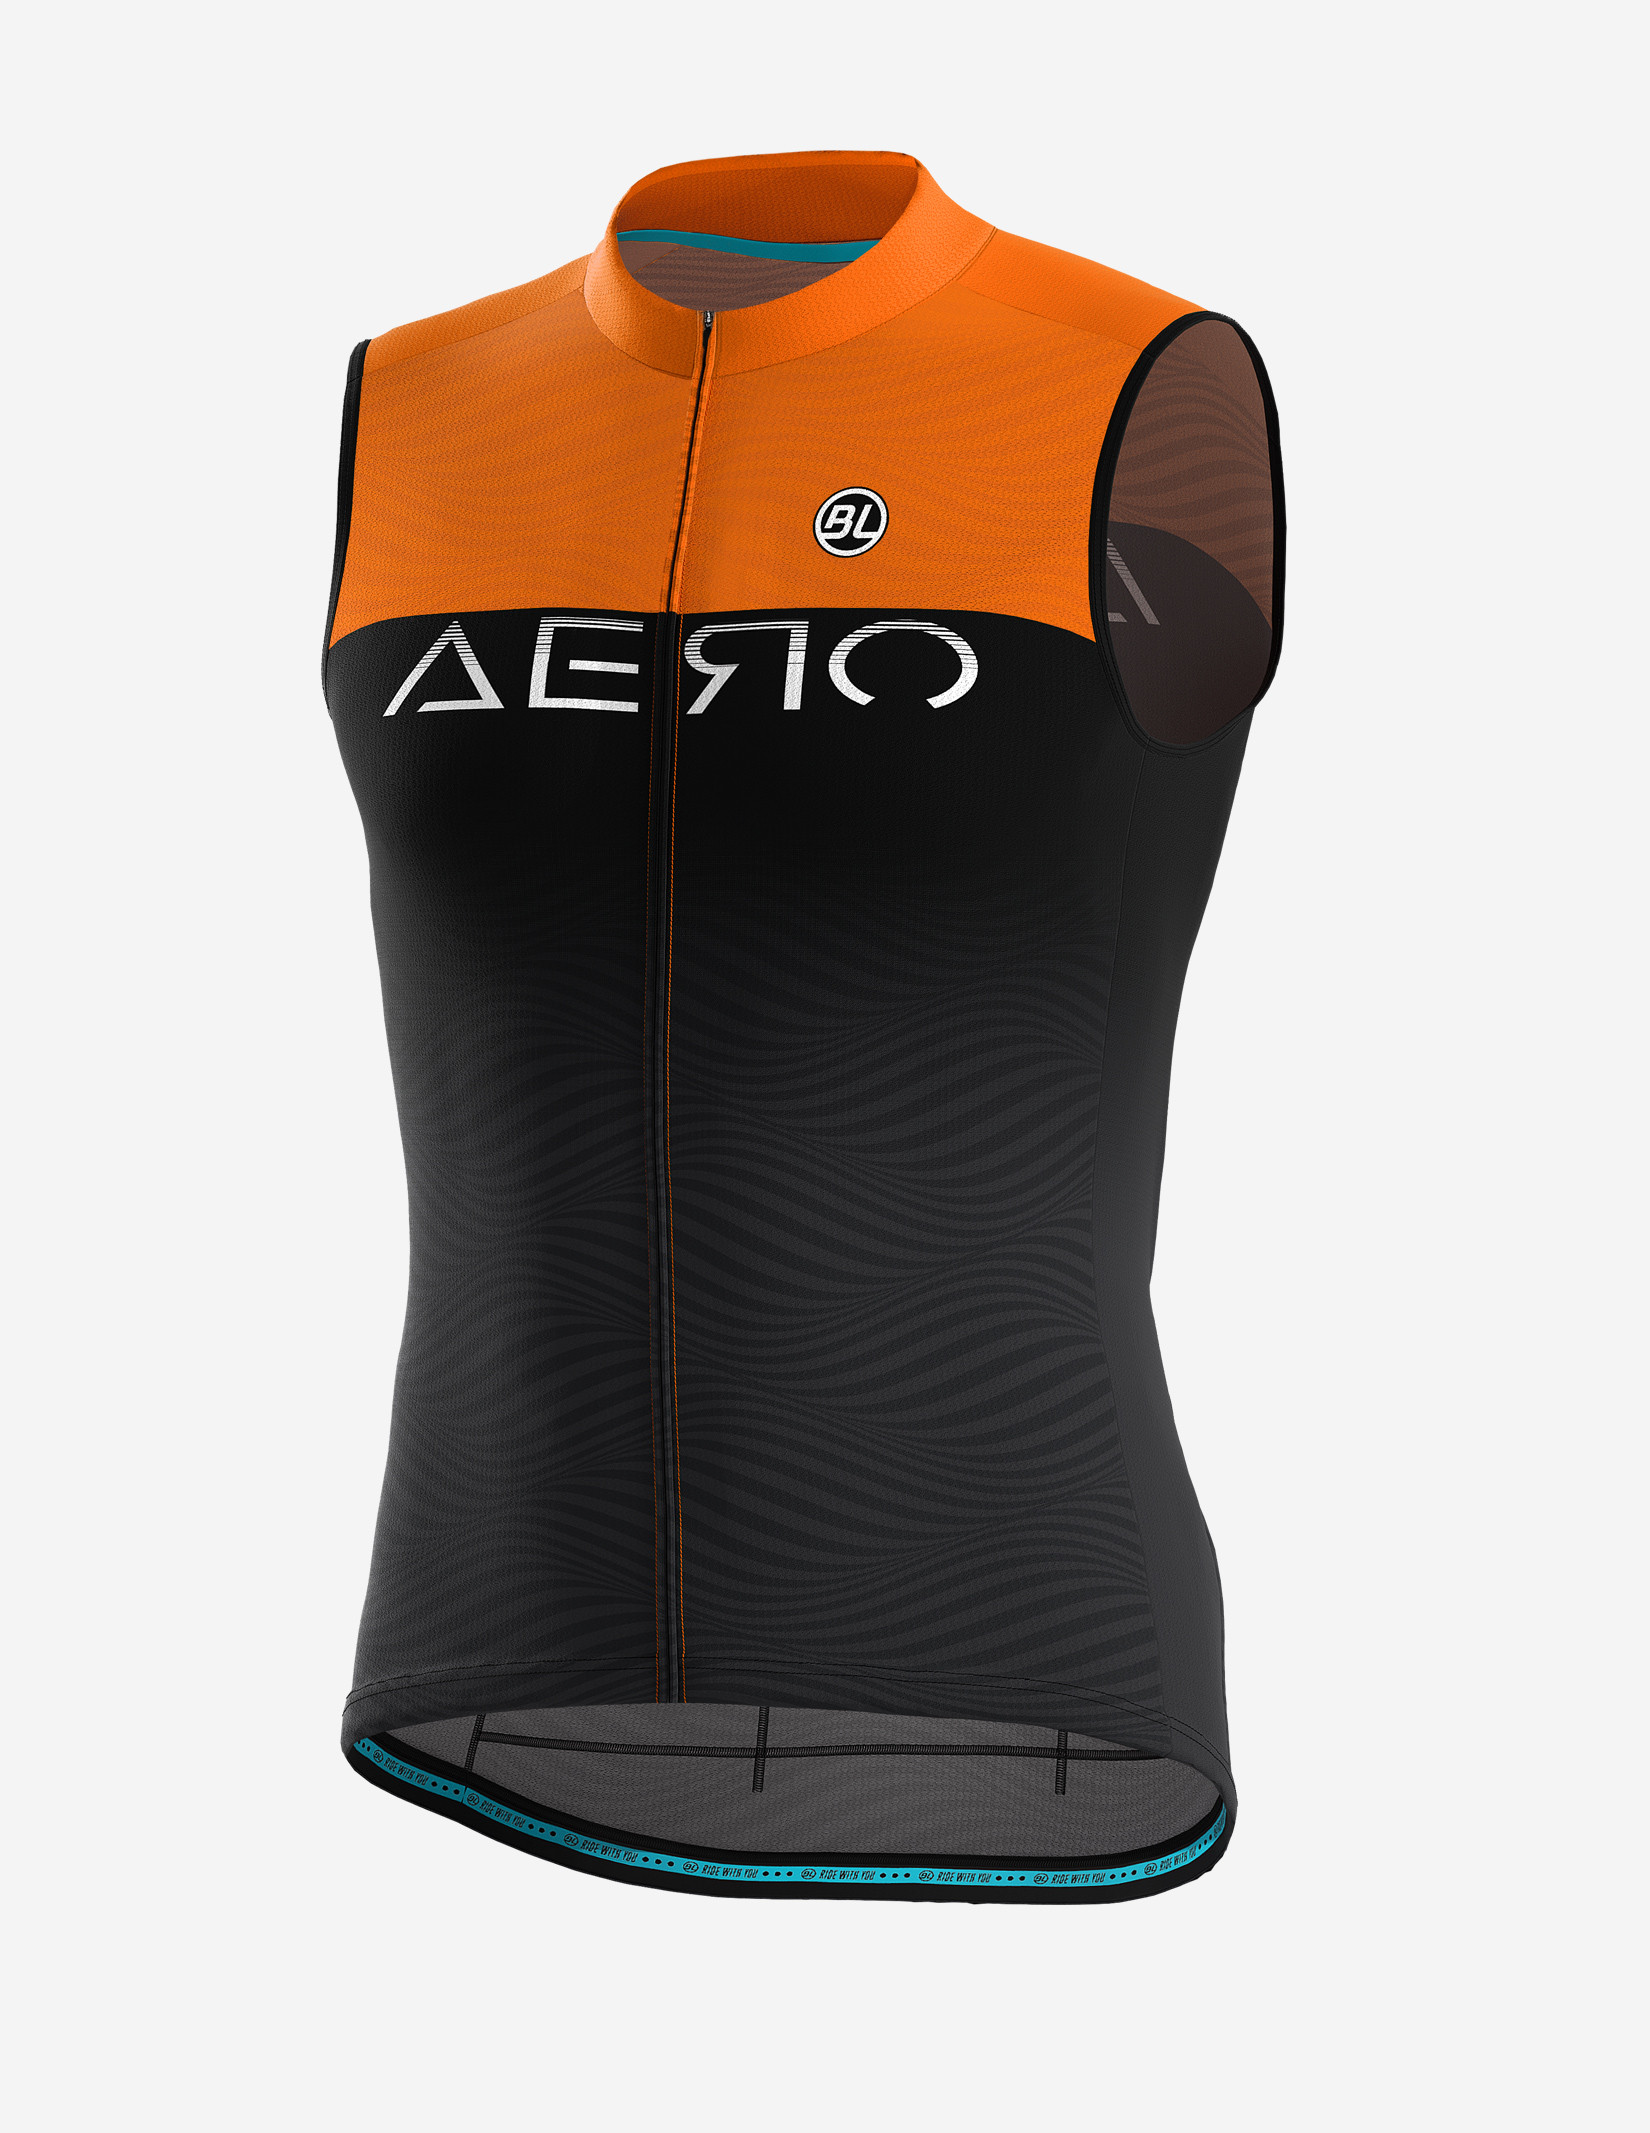 Maillot ciclismo hombre sin mangas AERO S2 | BL Bicycle Line